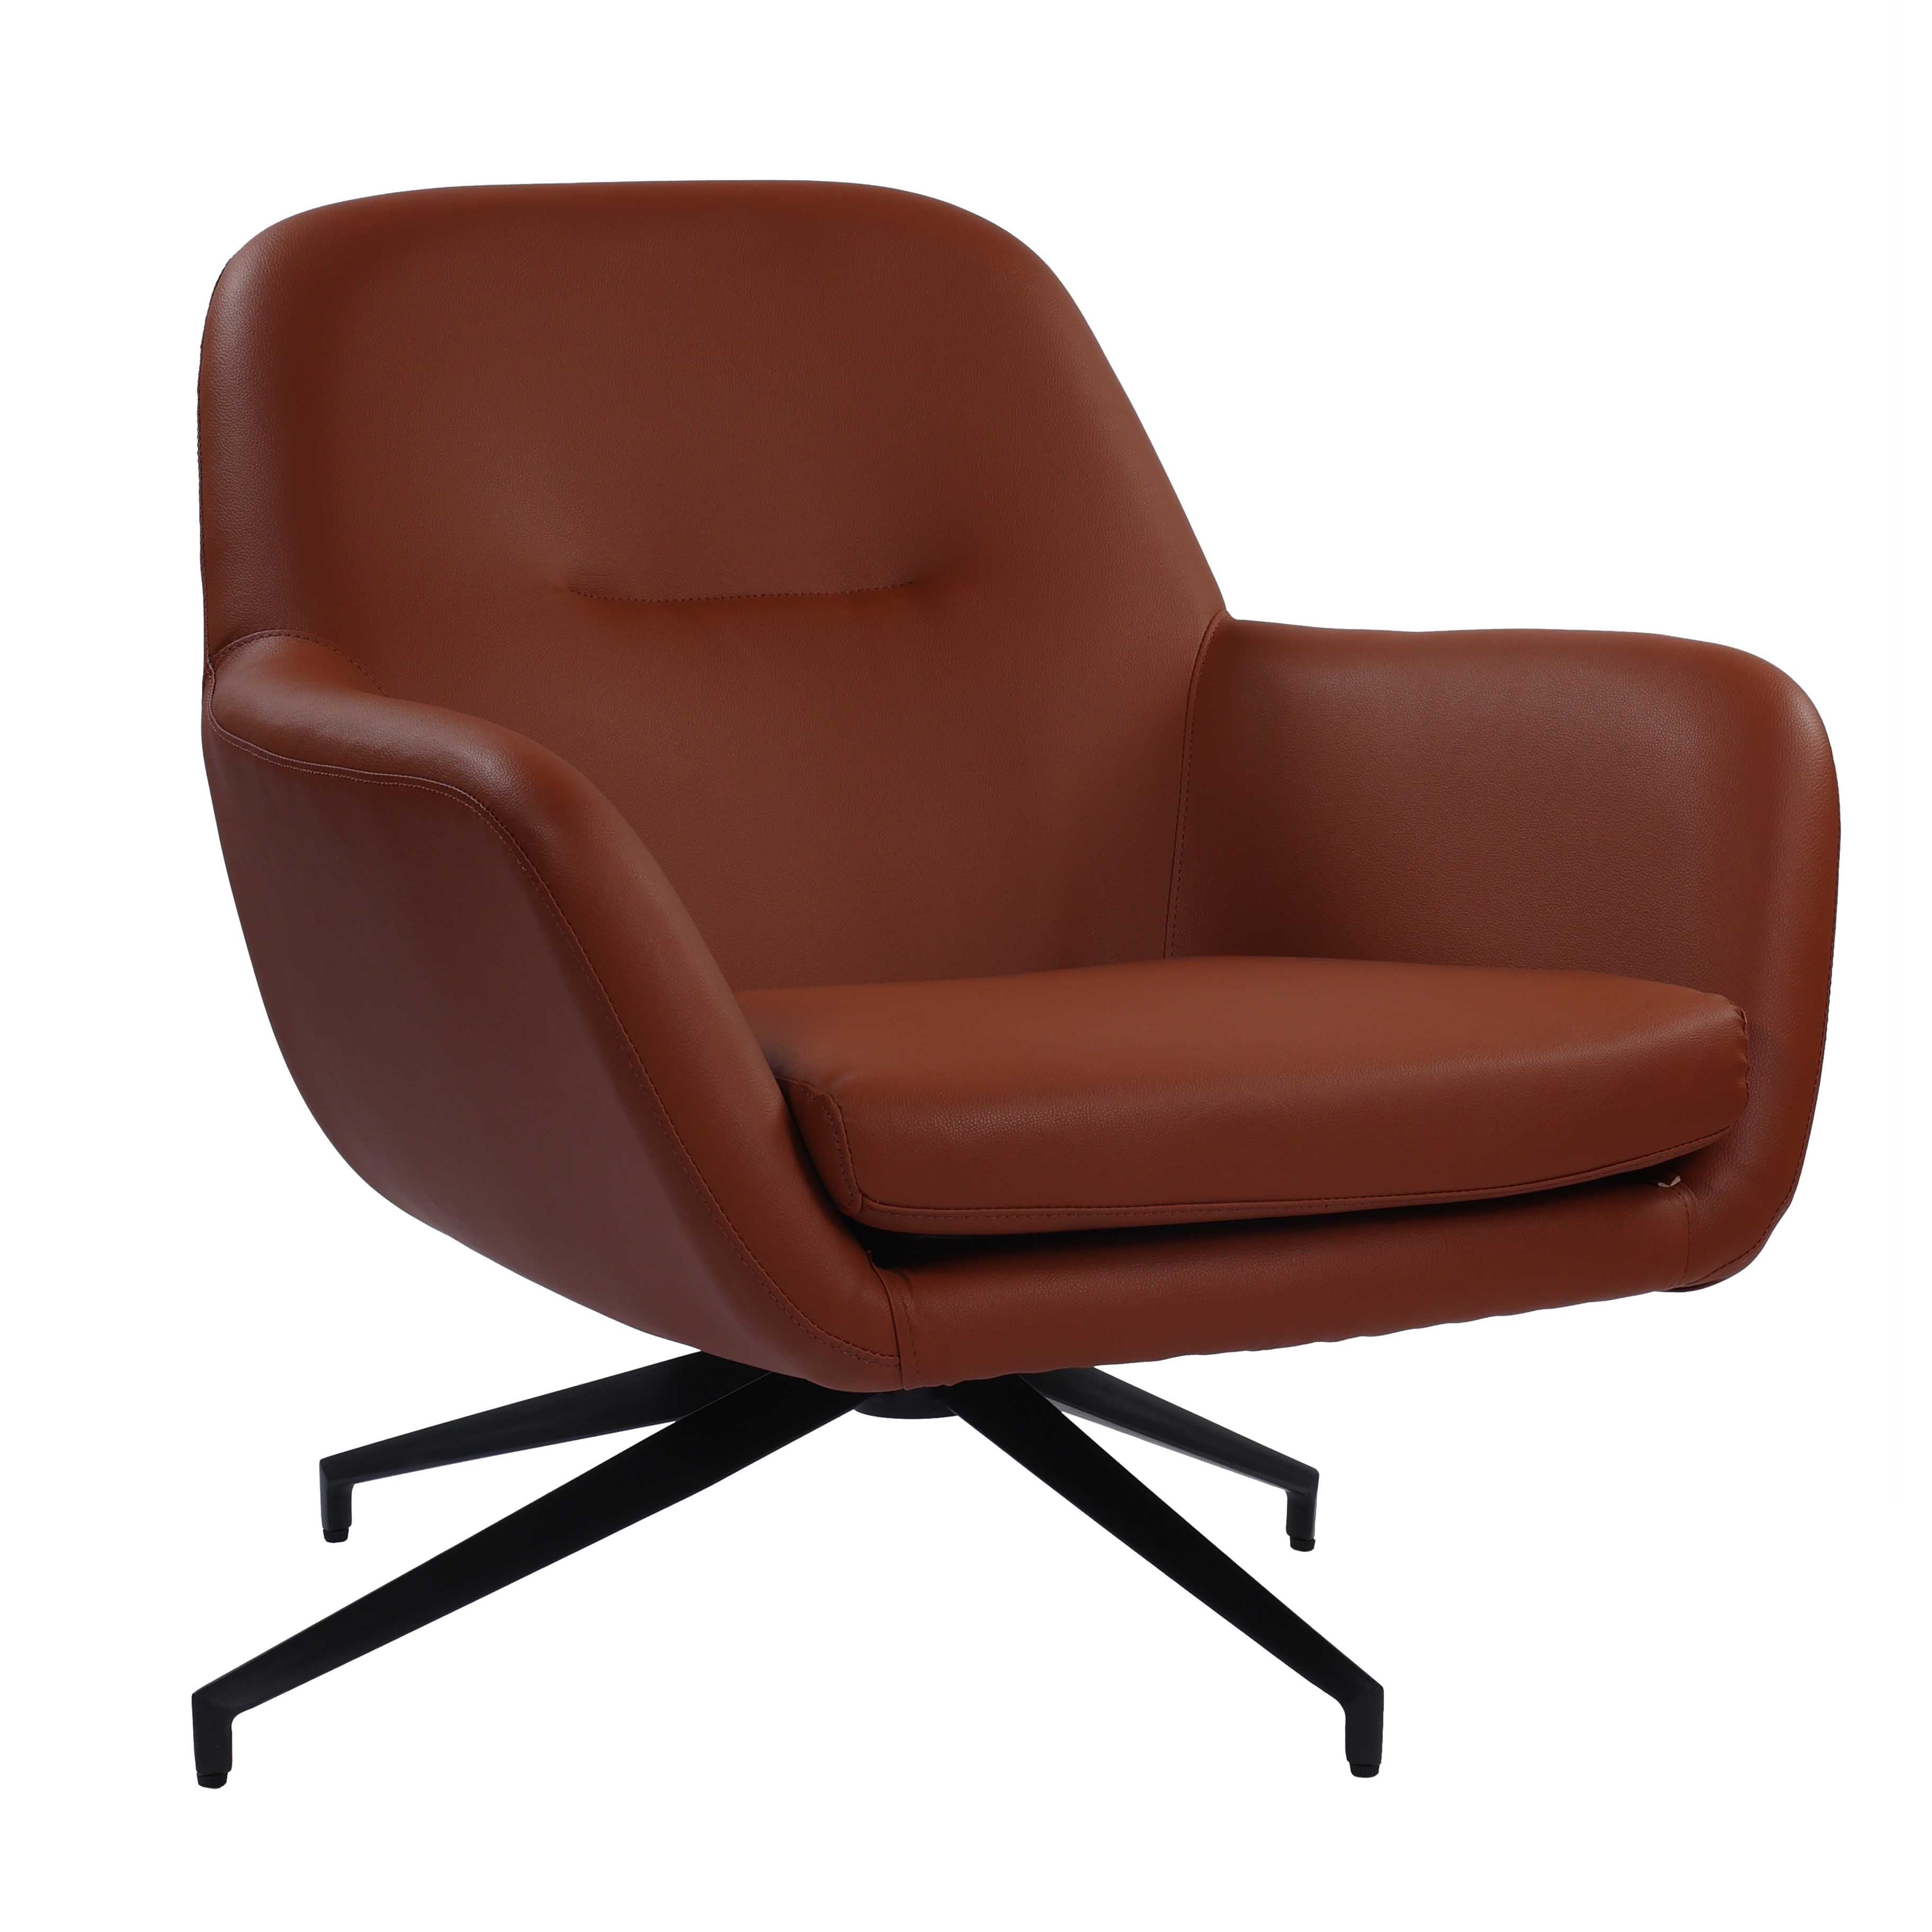 Celeste Modern Leather Upholstered Contemporary Armchair Accent Sofa Chair - Brown